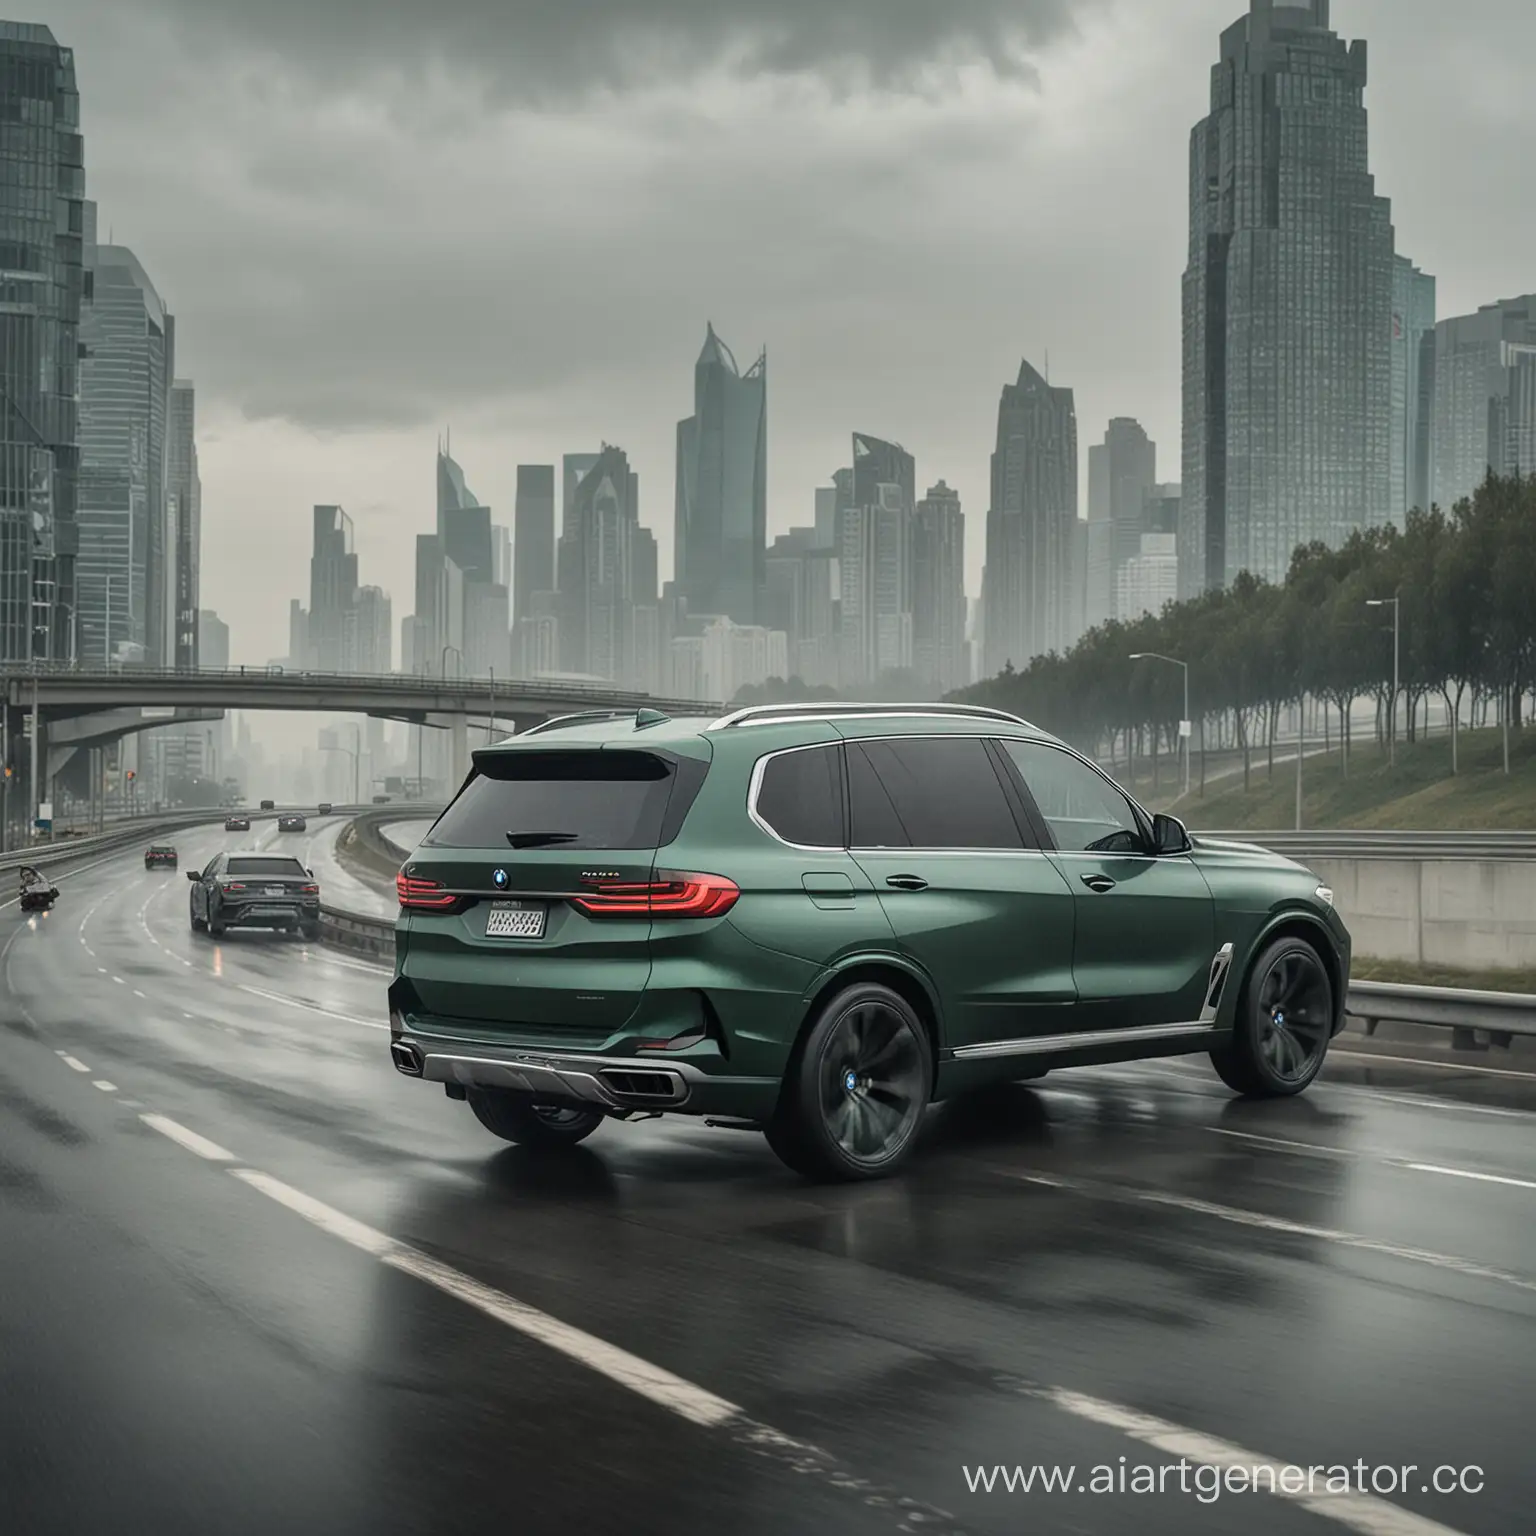 Matte-Emerald-BMW-X7-Driving-on-Overcast-City-Highway